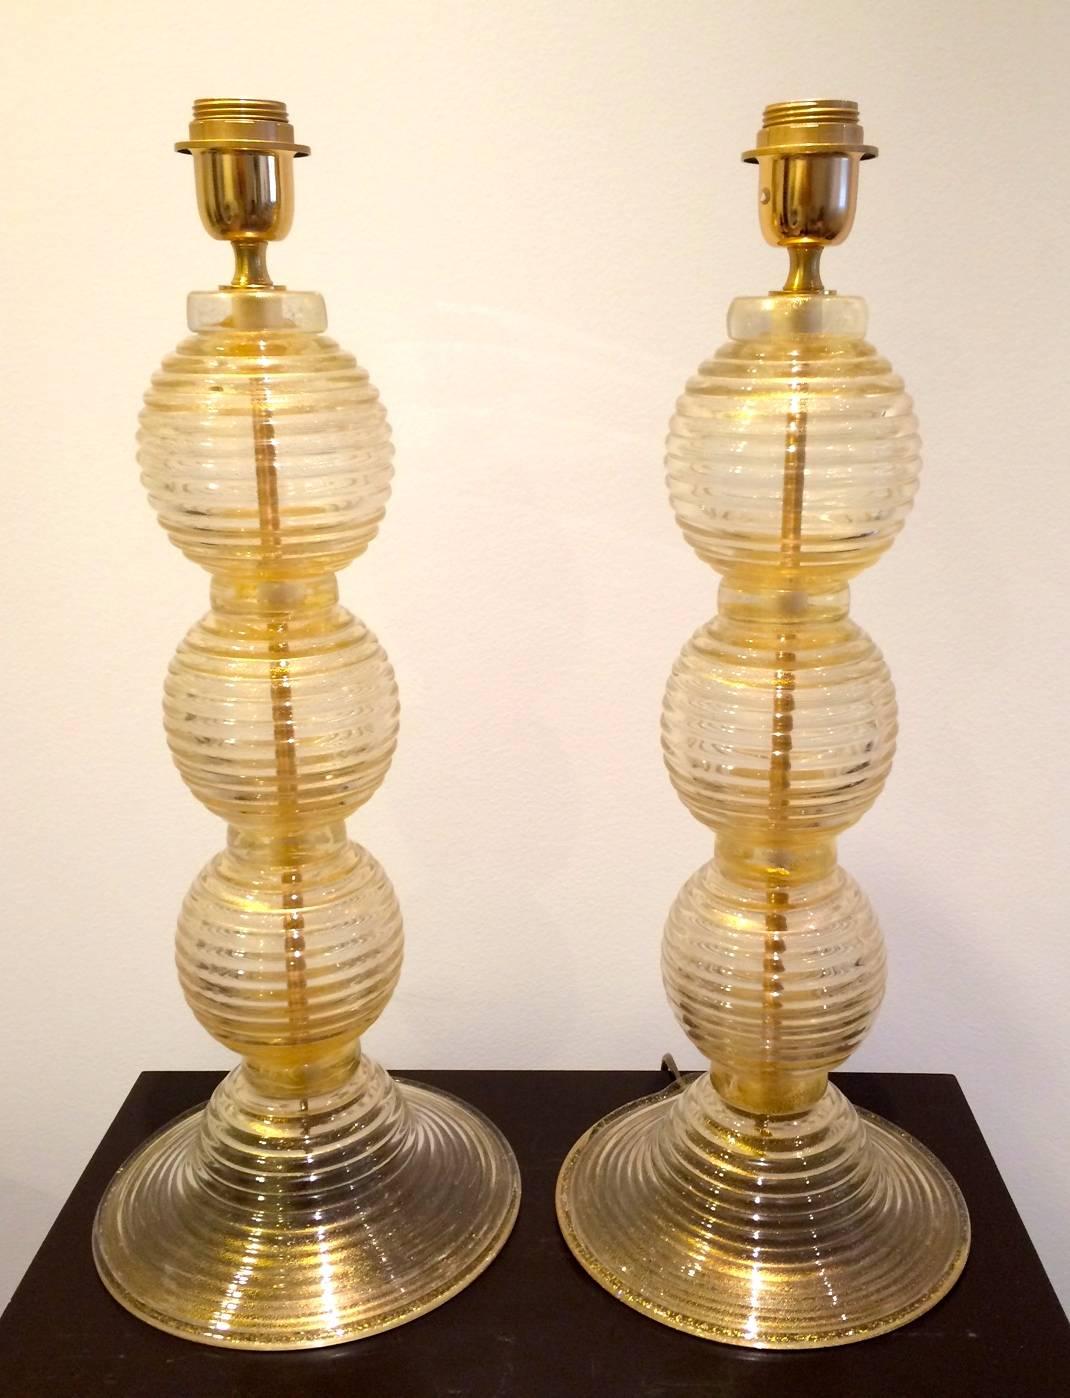 A pair of glass lamps from Murano / Seguso, Italy, 1970s.
Superimposed balls blown glass with golden dust inclusion (gold leaves flecks).
Mint condition.